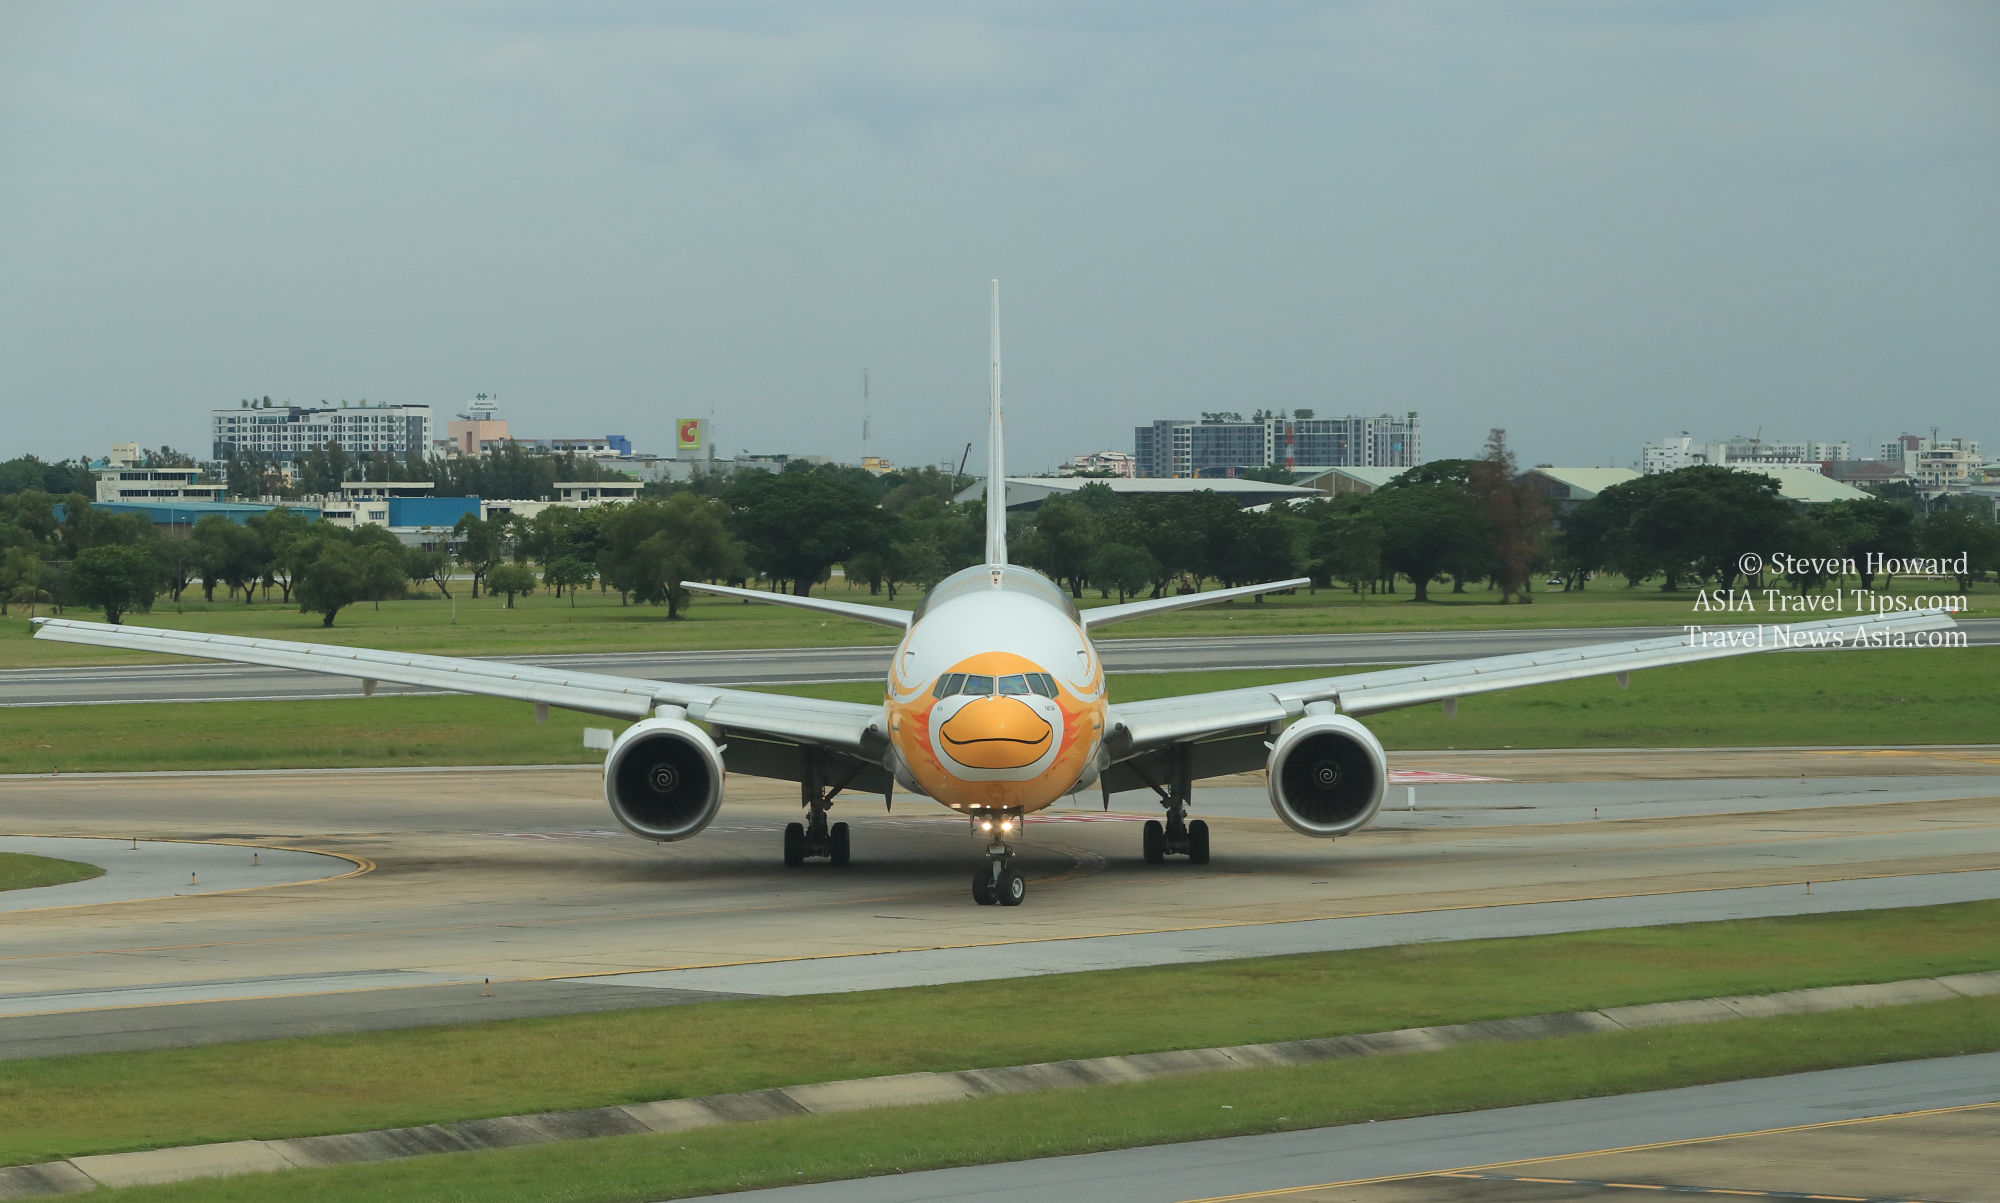 Nok Scoot Boeing 777-200 aircraft reg: HS-XBD at Don Mueang Airport in Bangkok, Thailand on 25 June 2018. Click to enlarge.